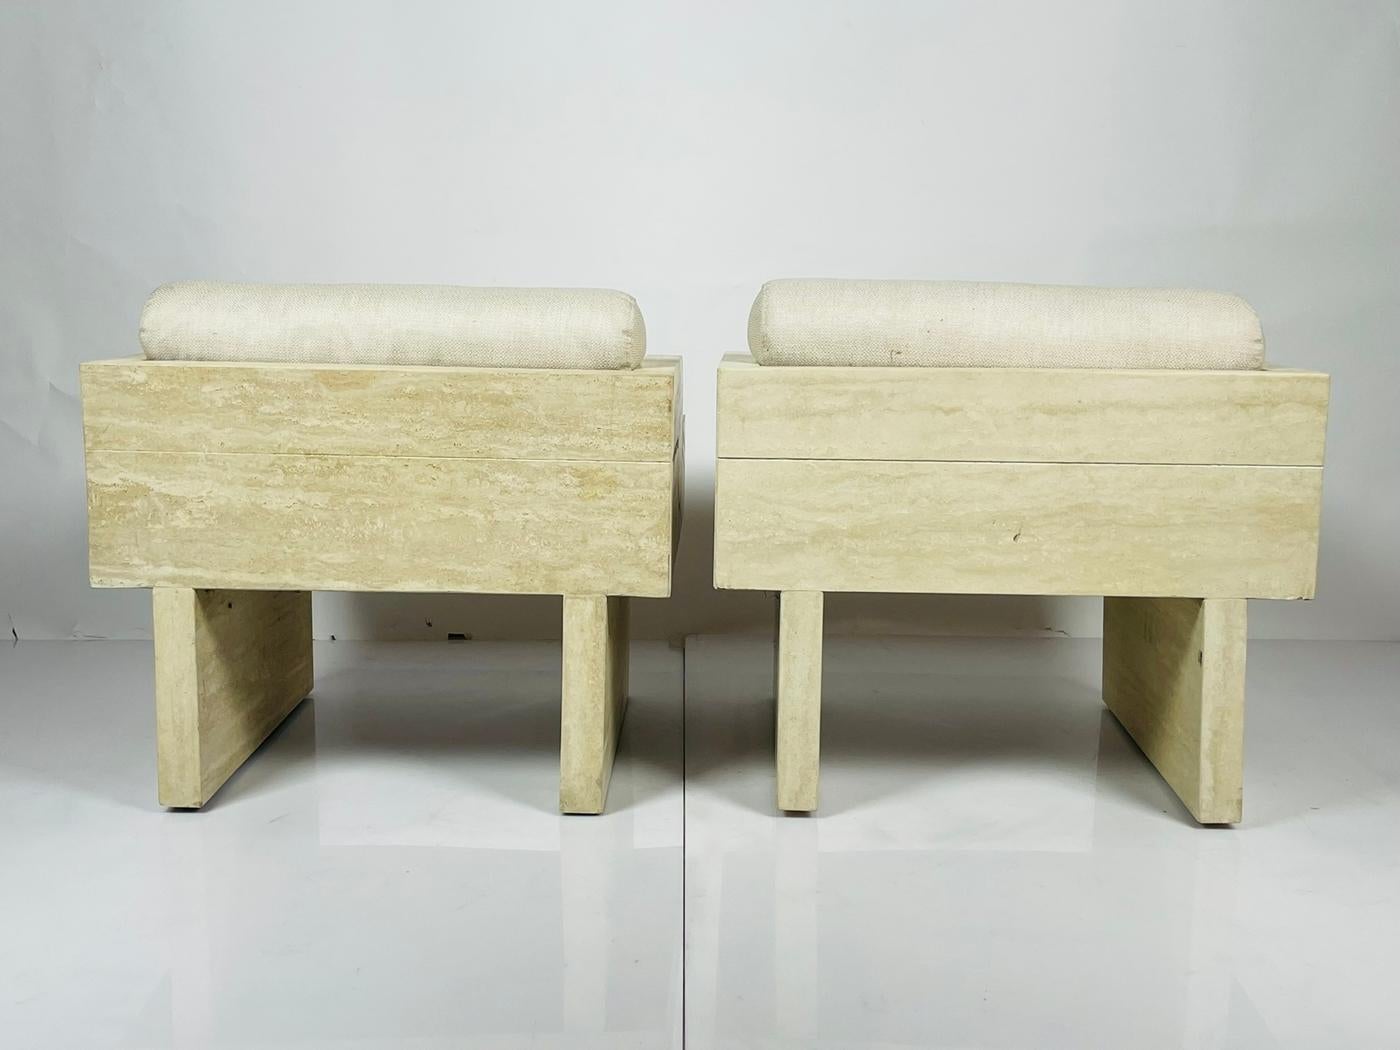 Contemporary Pair of Travertine Arm Chairs Attb to Stéphane Parmentier For Sale